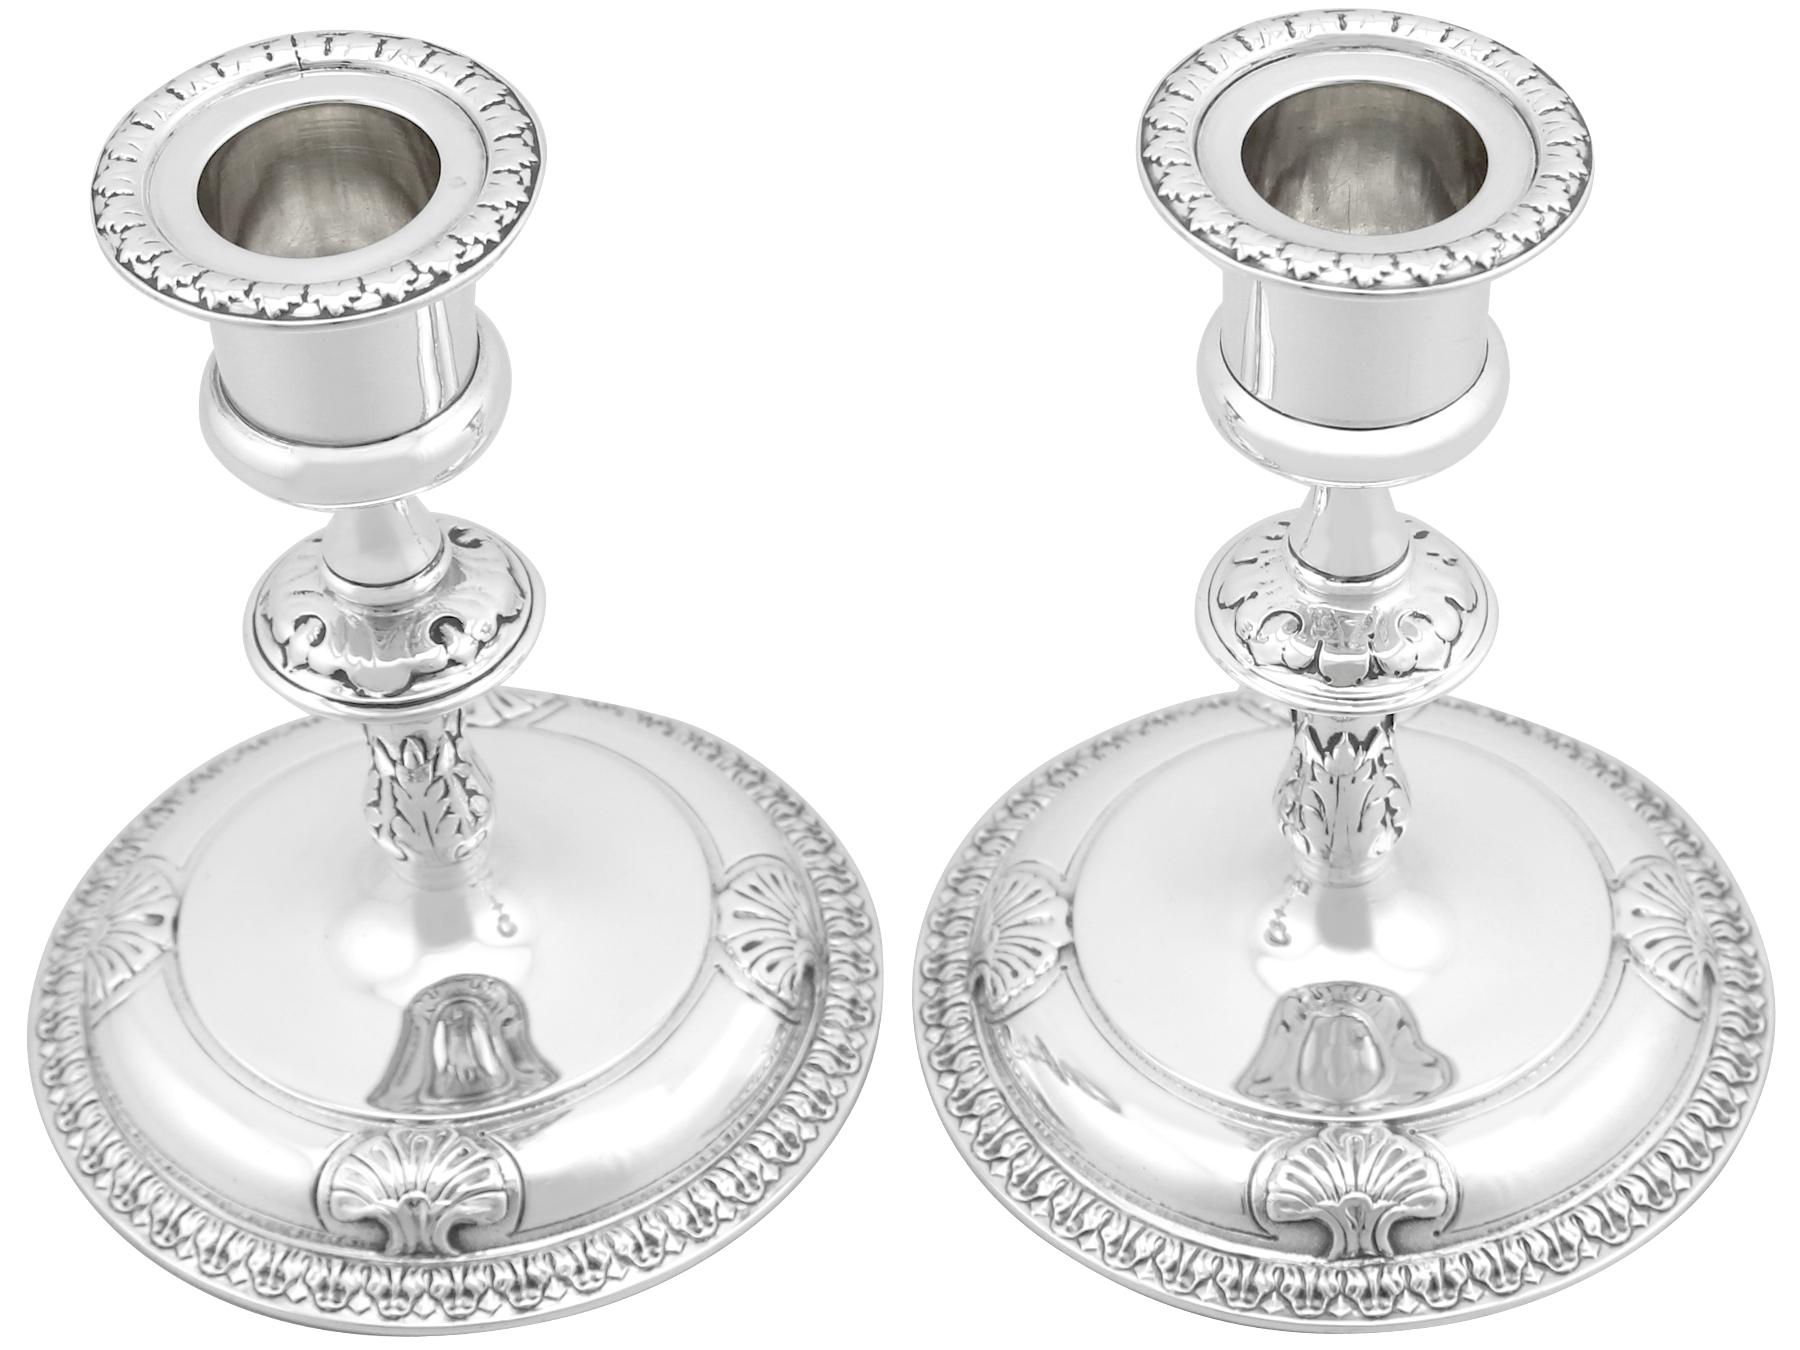 An exceptional, fine and impressive pair of antique Victorian English sterling silver piano candlesticks; an addition of our ornamental silverware collection

These exceptional antique Victorian sterling silver candlesticks have a circular rounded